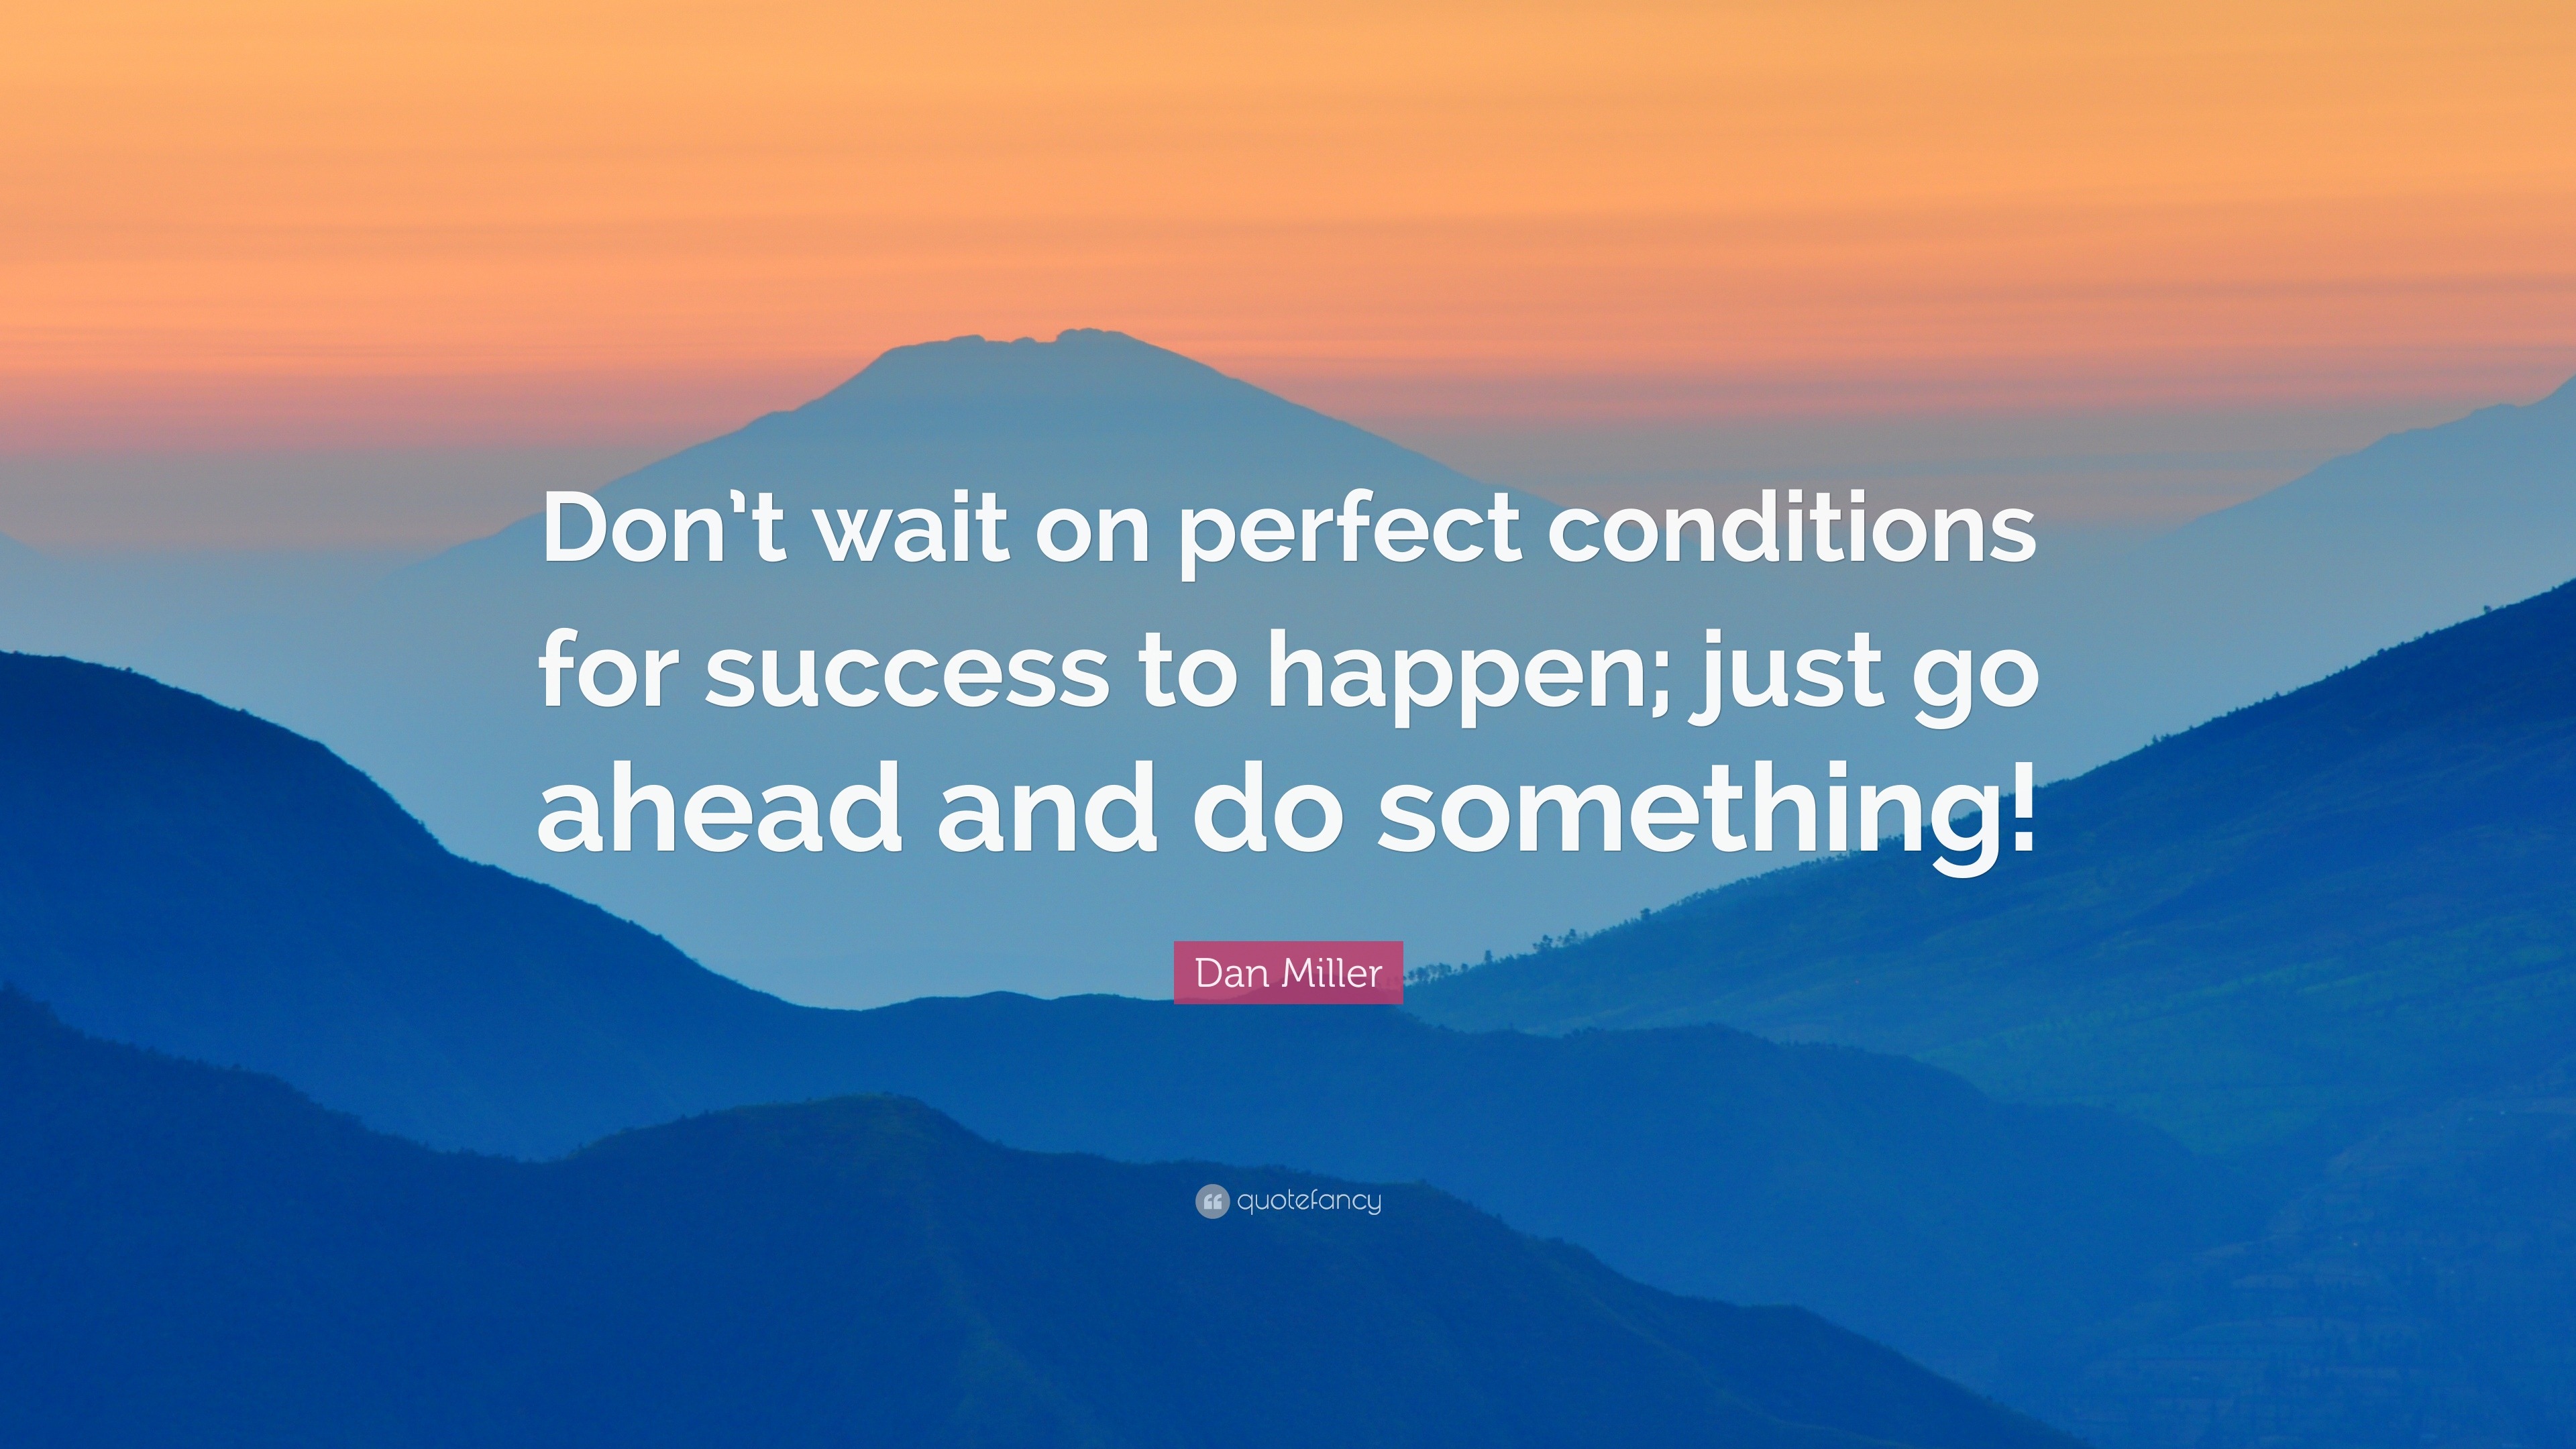 Dan Miller Quote: “Don’t wait on perfect conditions for success to